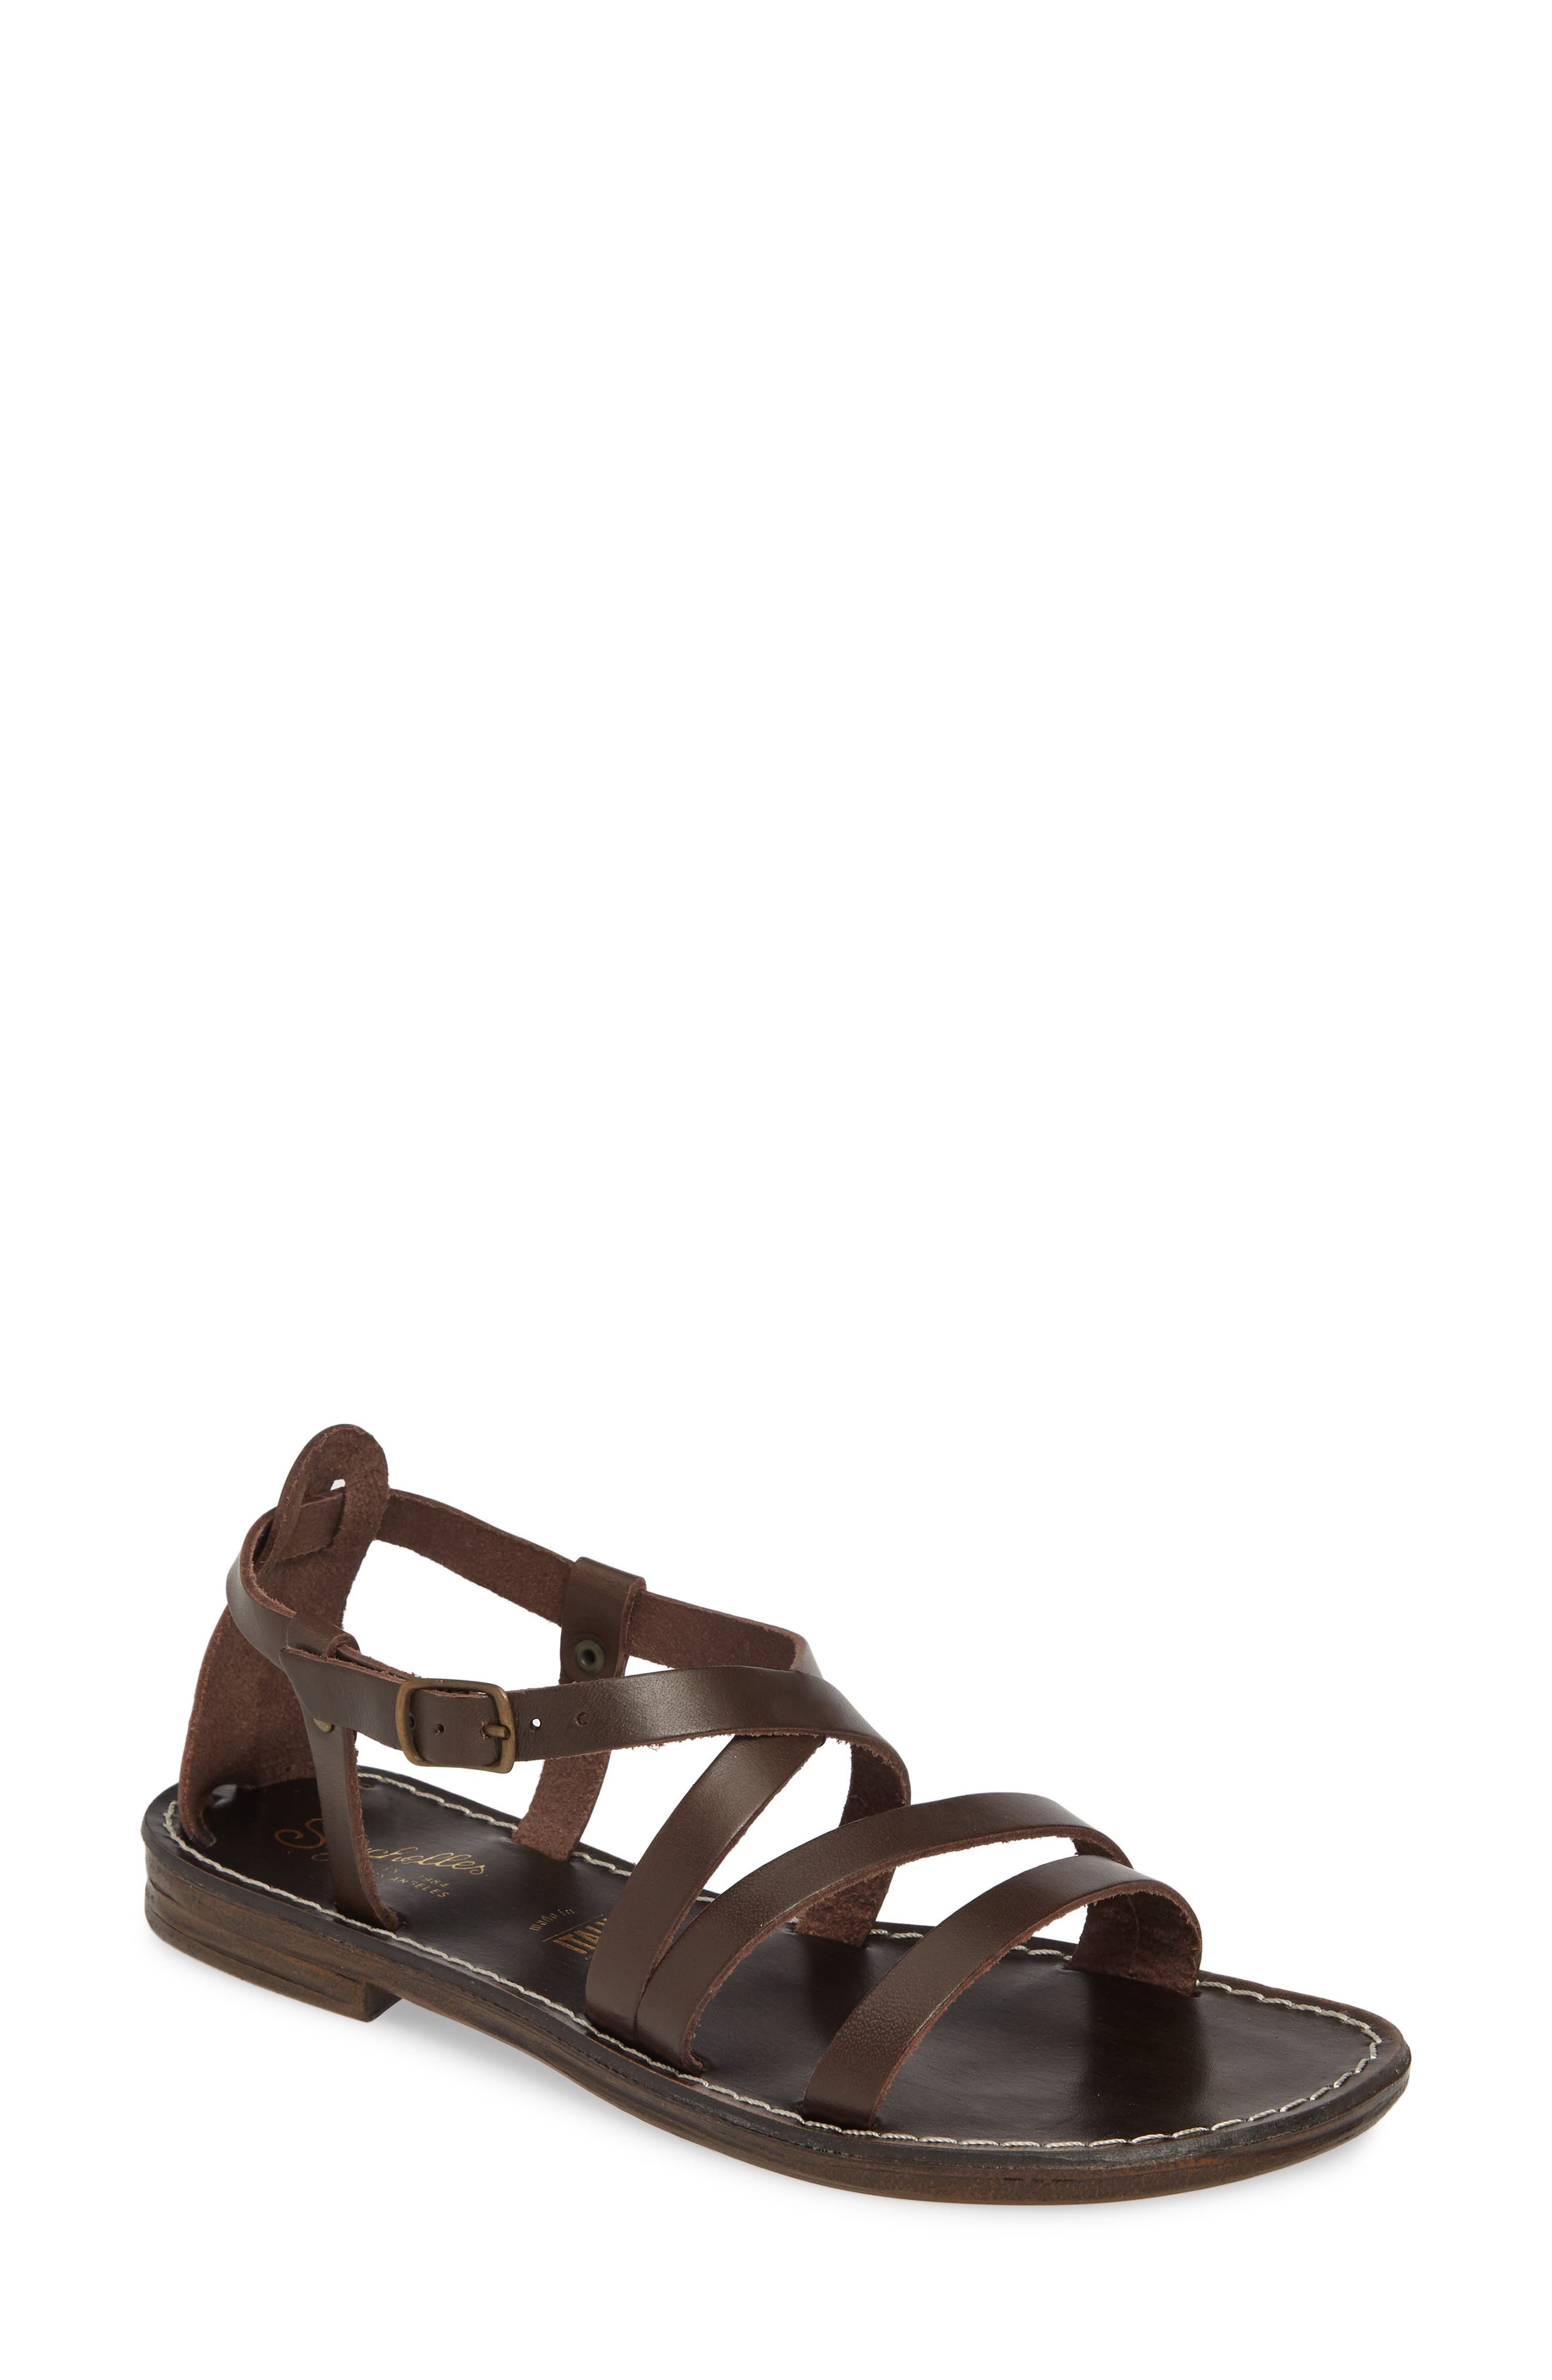 brown leather strappy sandals